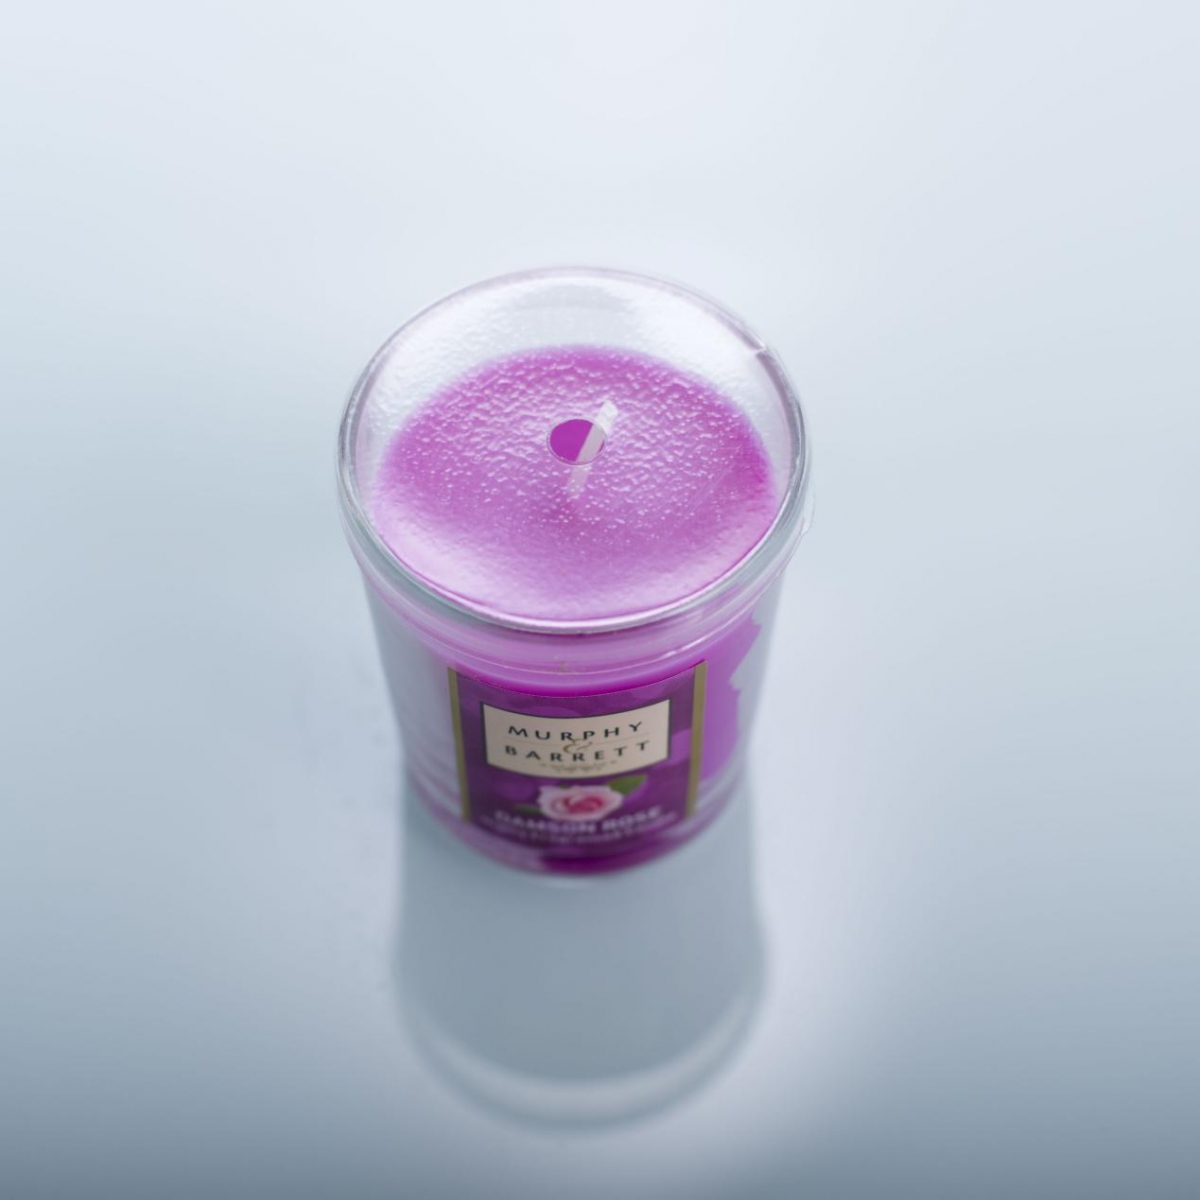 Mini Glass Jar Candles -Colorful Soy Candles , Damson Rose ,Vanilla Fig ,Scented Candles ,China Factory ,Cheapest  Price-HOWCANDLE-Candles,Scented Candles,Aromatherapy Candles,Soy Candles,Vegan Candles,Jar Candles,Pillar Candles,Candle Gift Sets,Essential Oils,Reed Diffuser,Candle Holder,